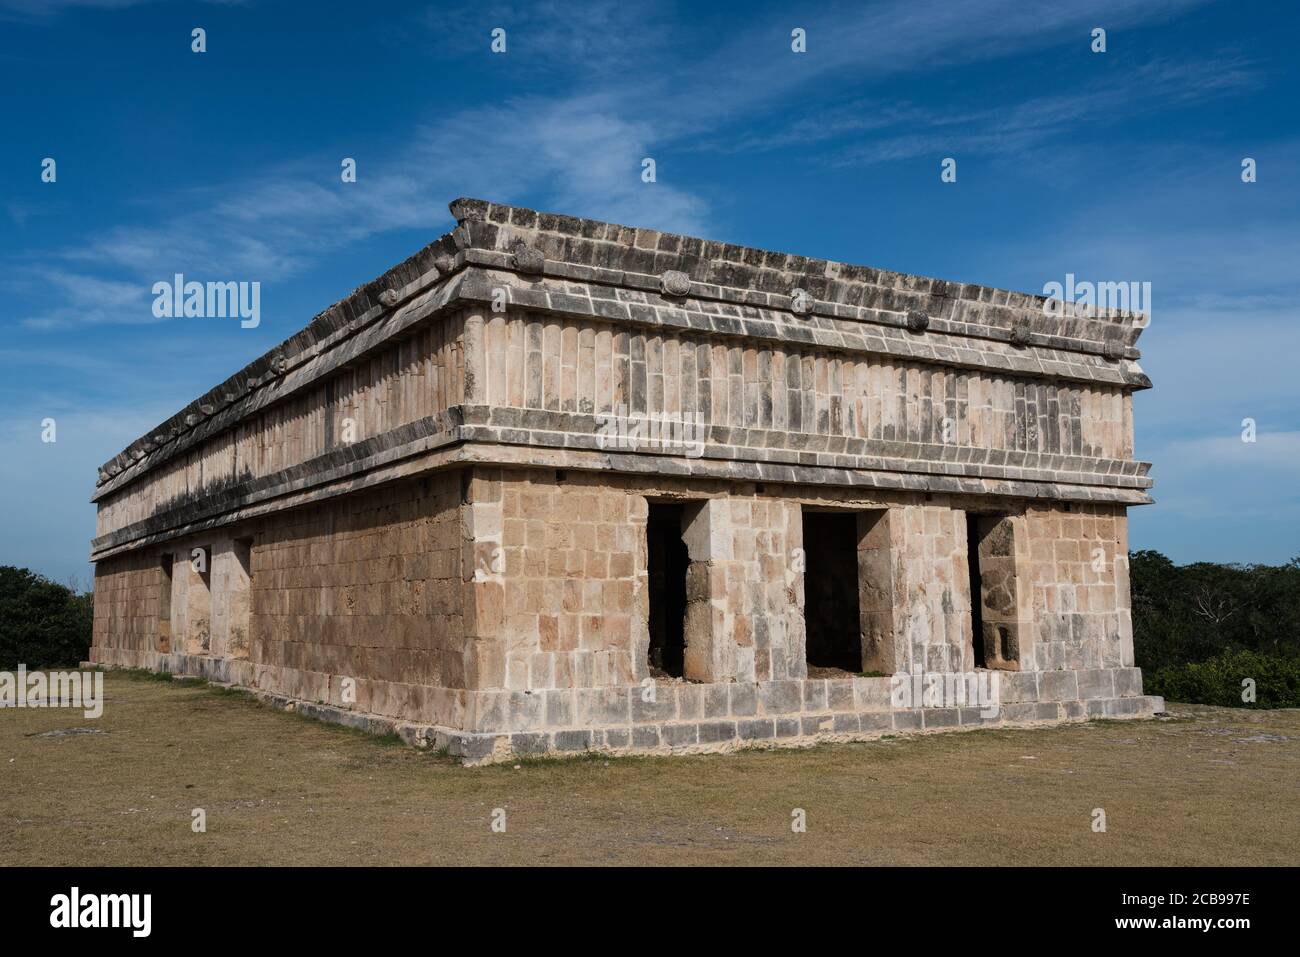 The House of the Turtles in the pre-Hispanic Mayan ruins of Uxmal, Mexico. Stock Photo